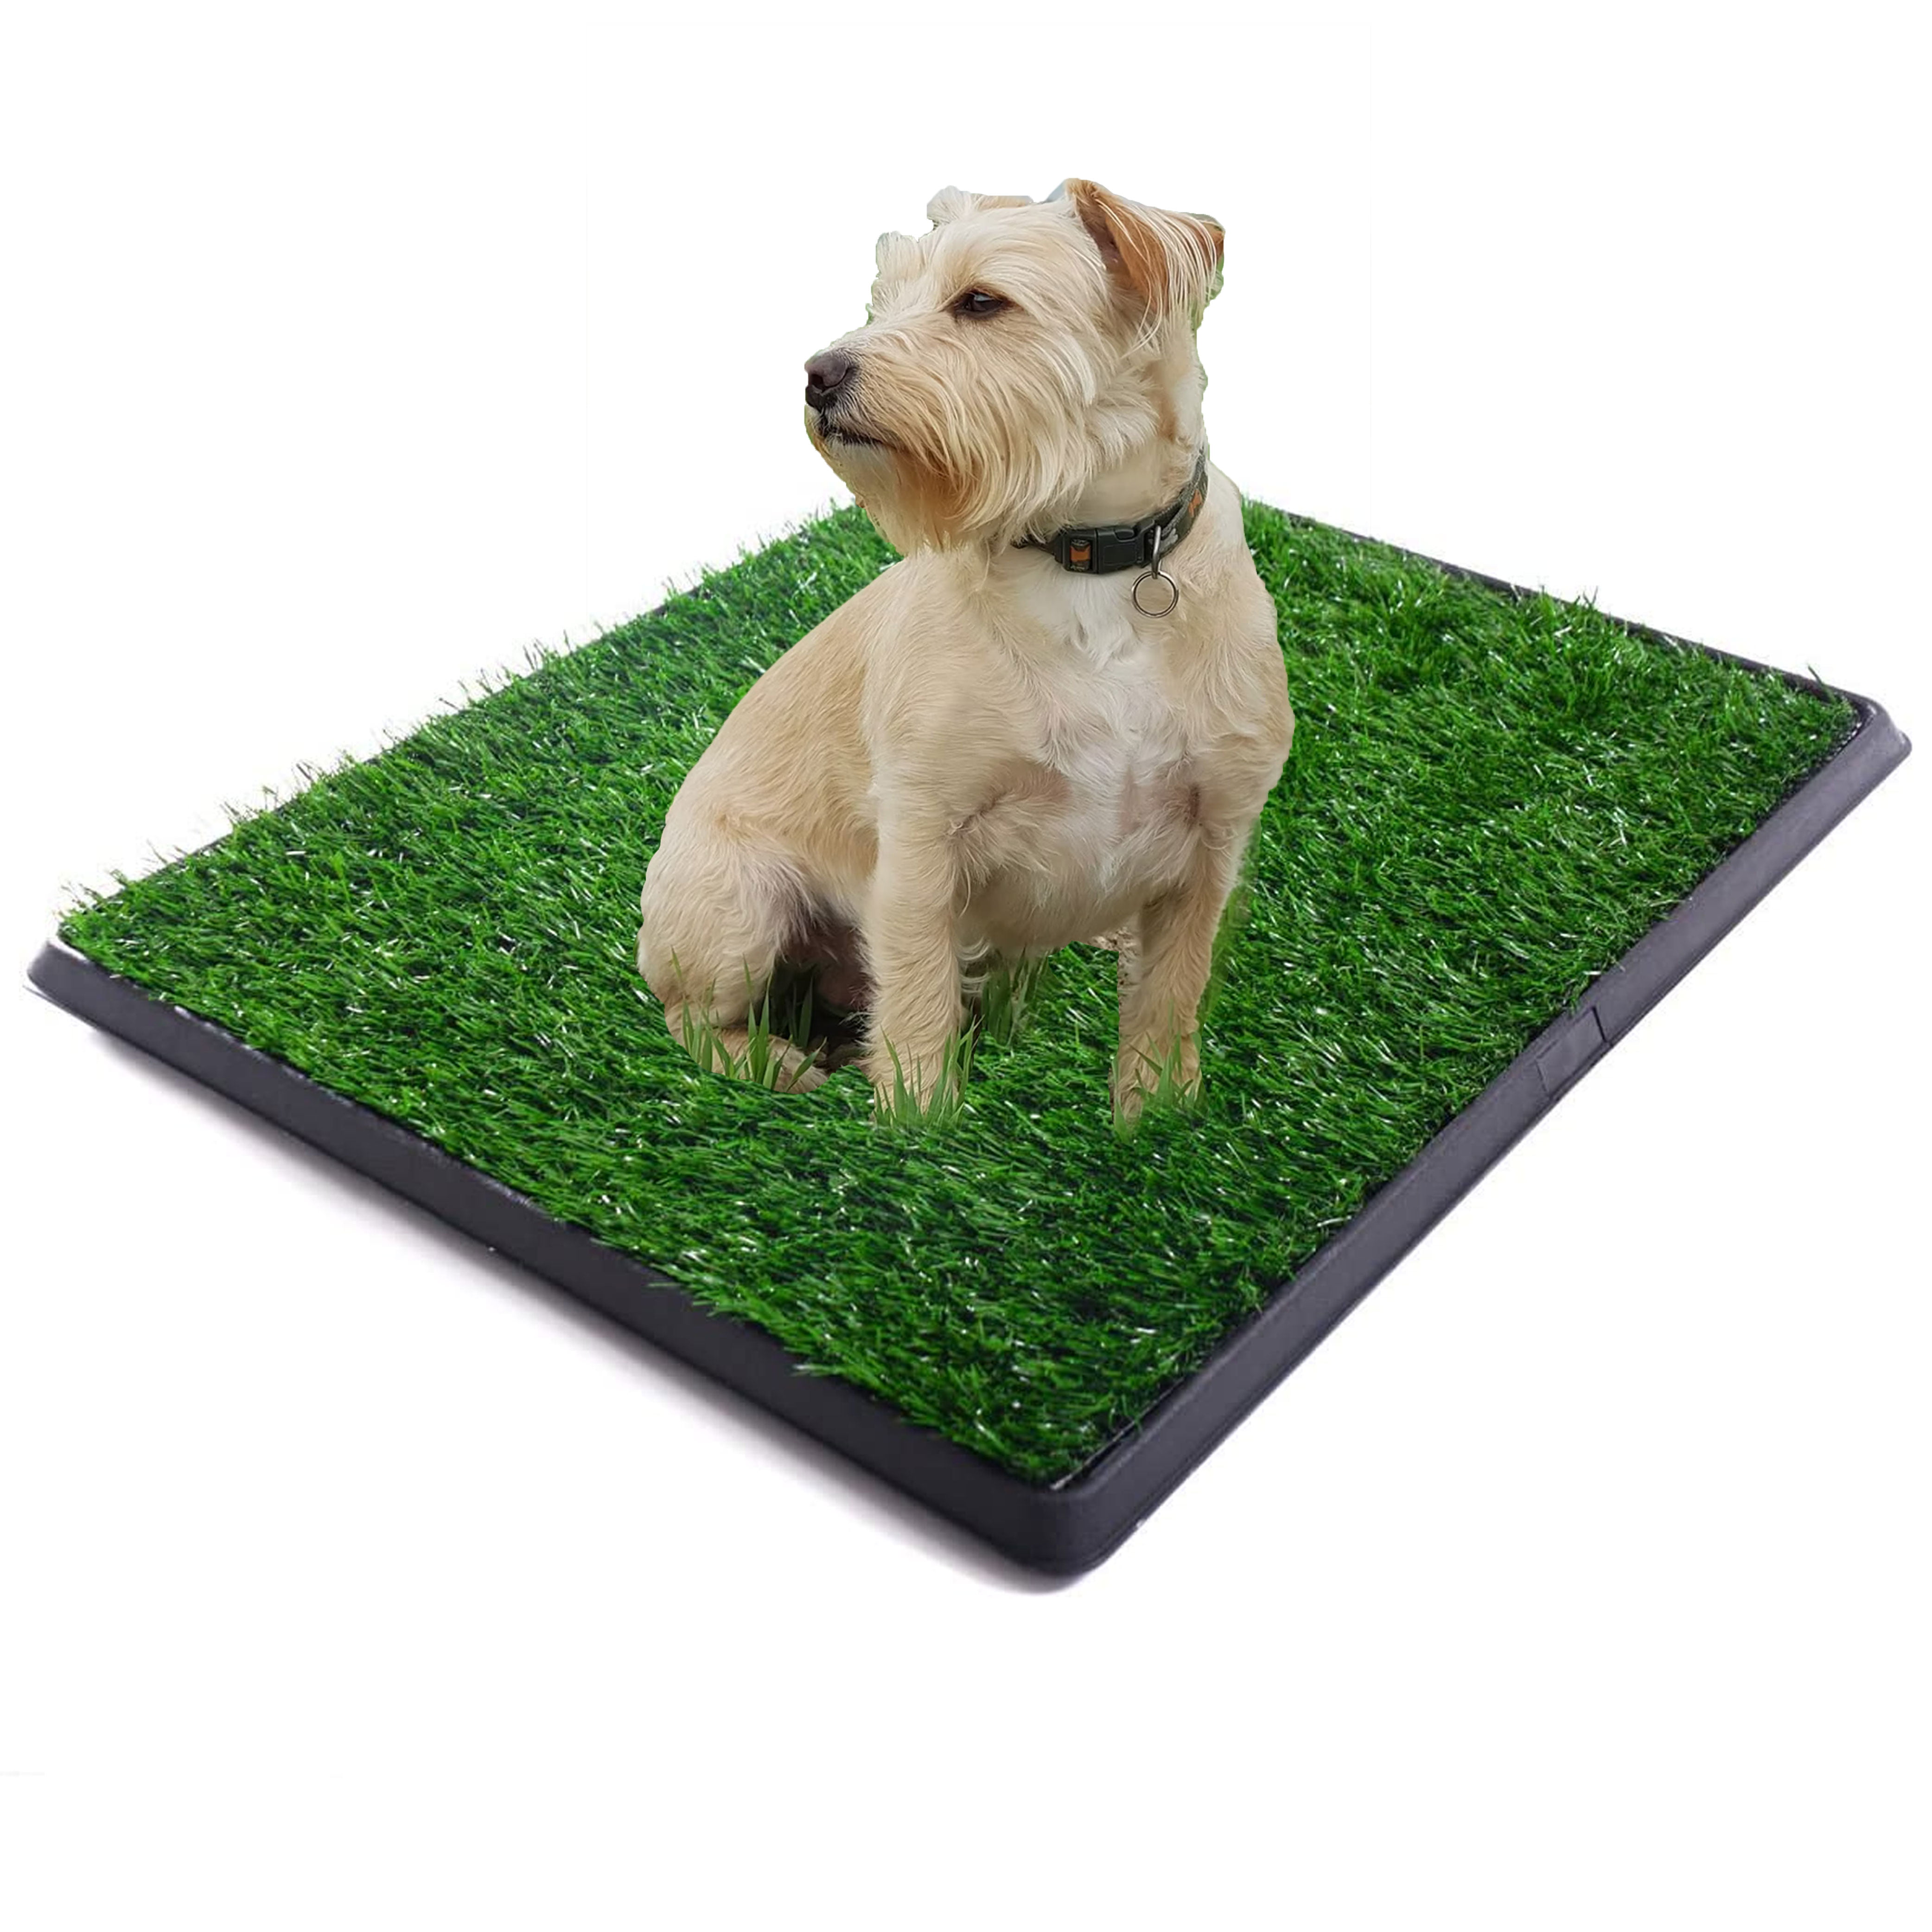 TRAINING POTTY TRAY-PET PATCH OF GRASS 